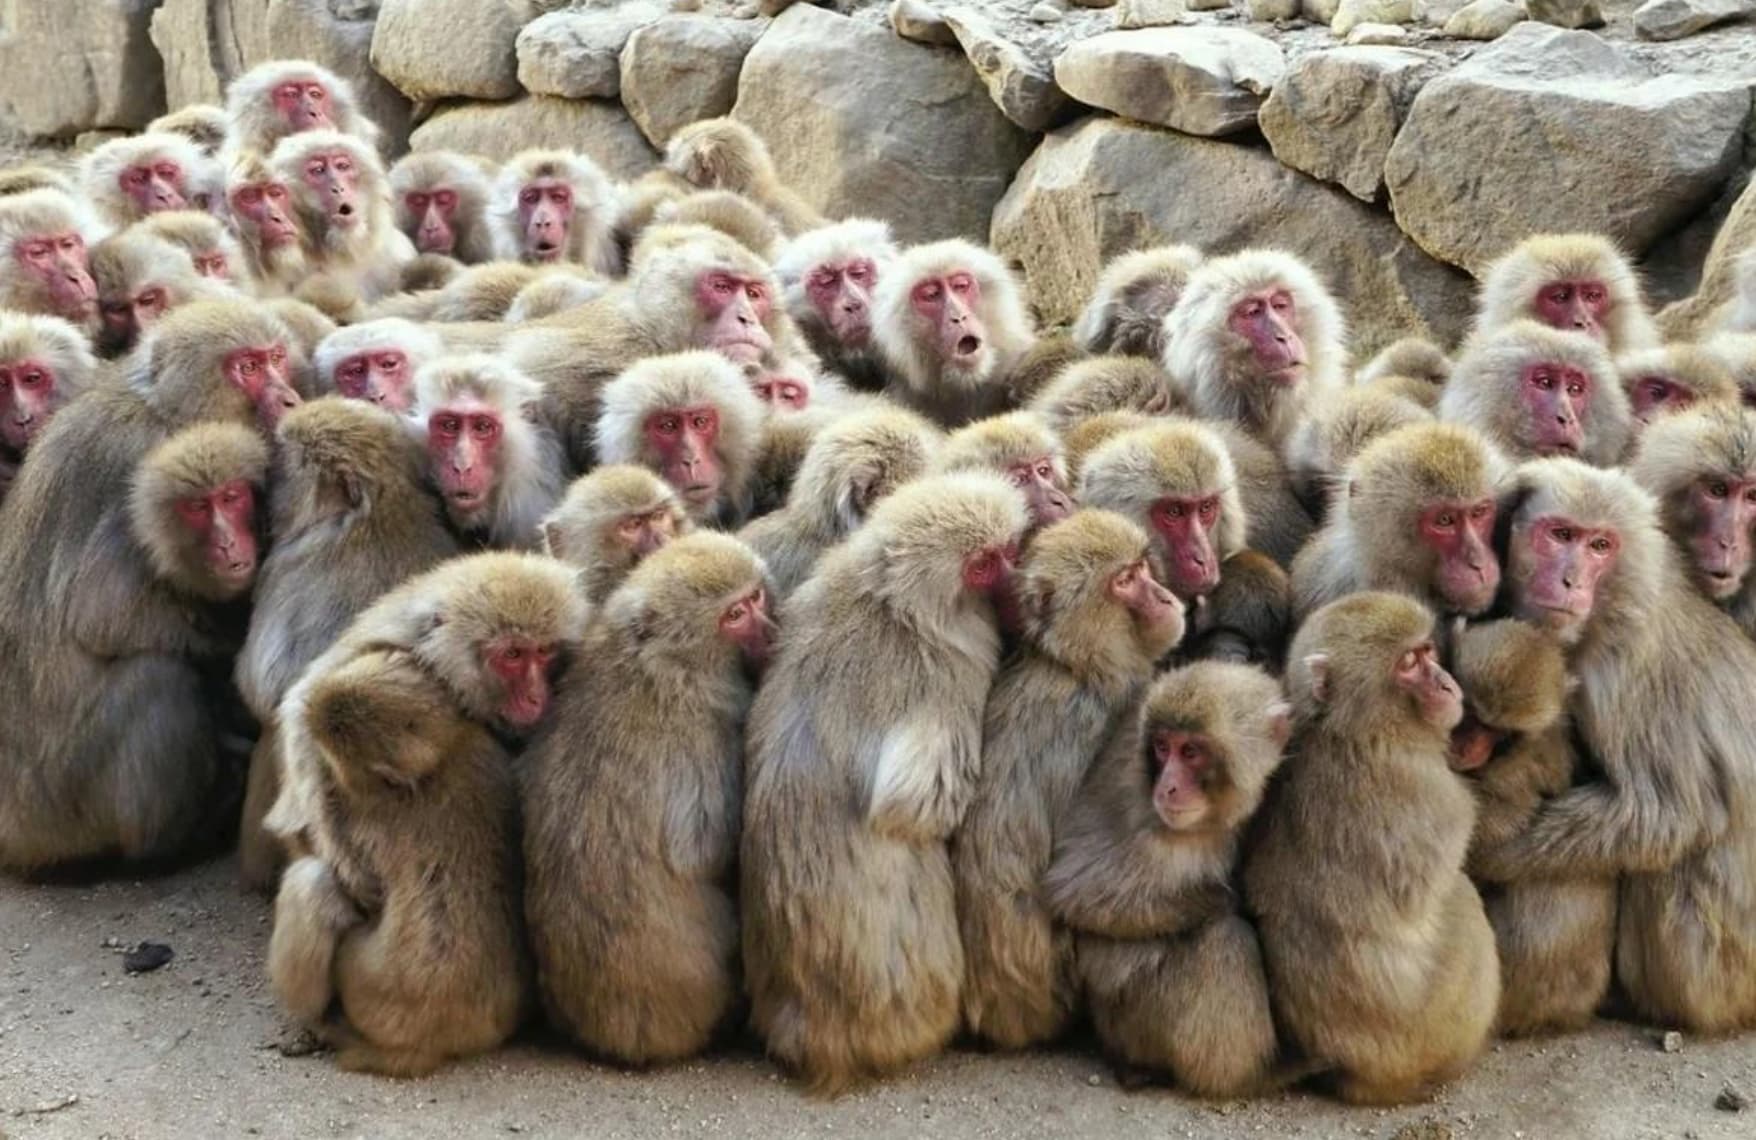 In 2020, 70 monkeys at a zoo in eastern Japan decided to make a break for it, sprinting through a hole in the fence of their enclosure. 